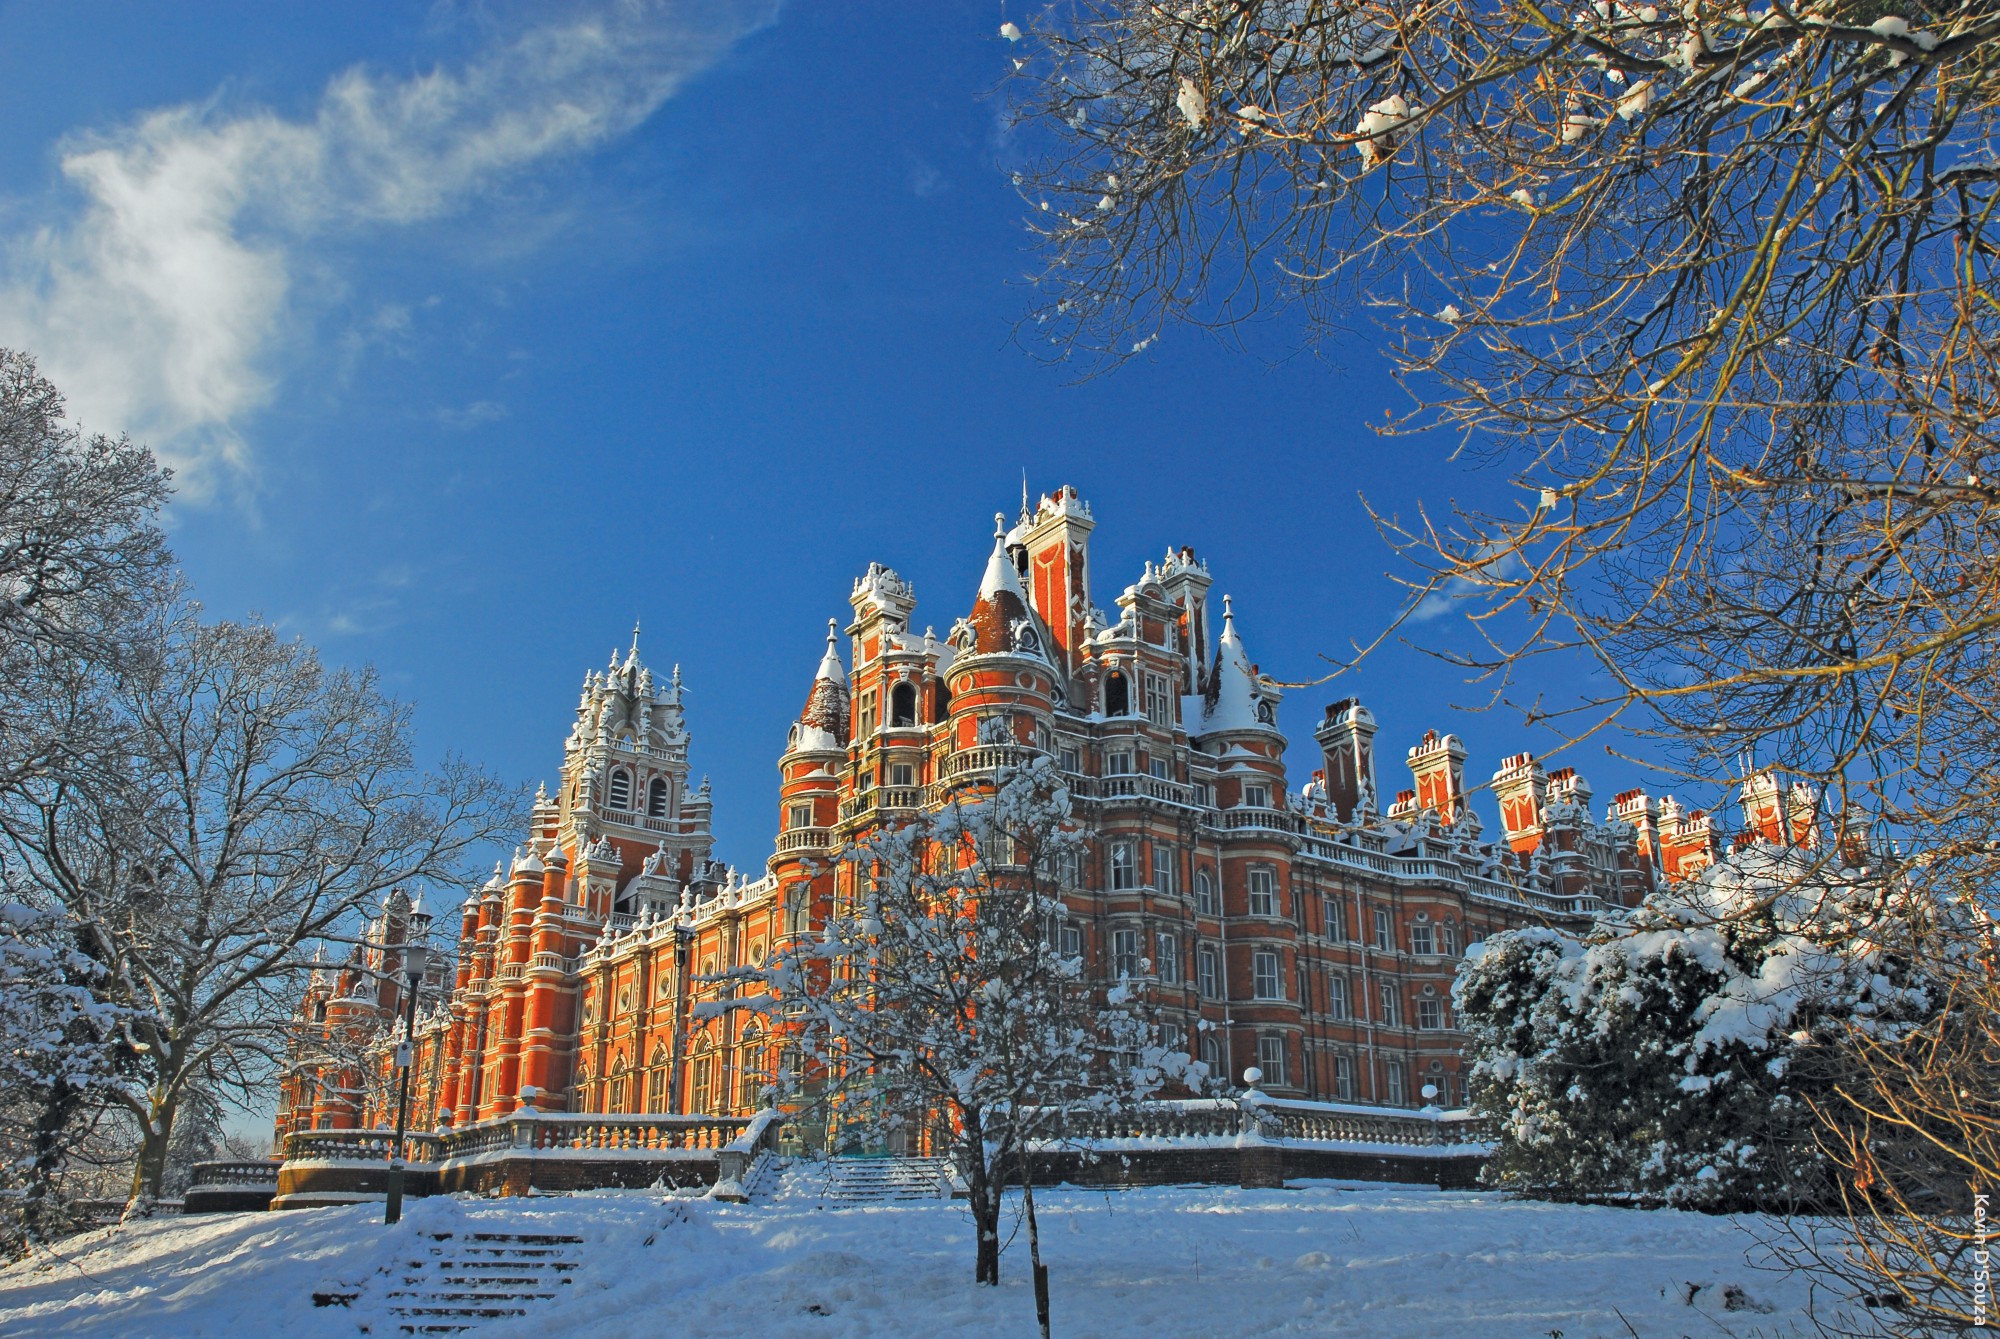 Royal Holloway in the winter